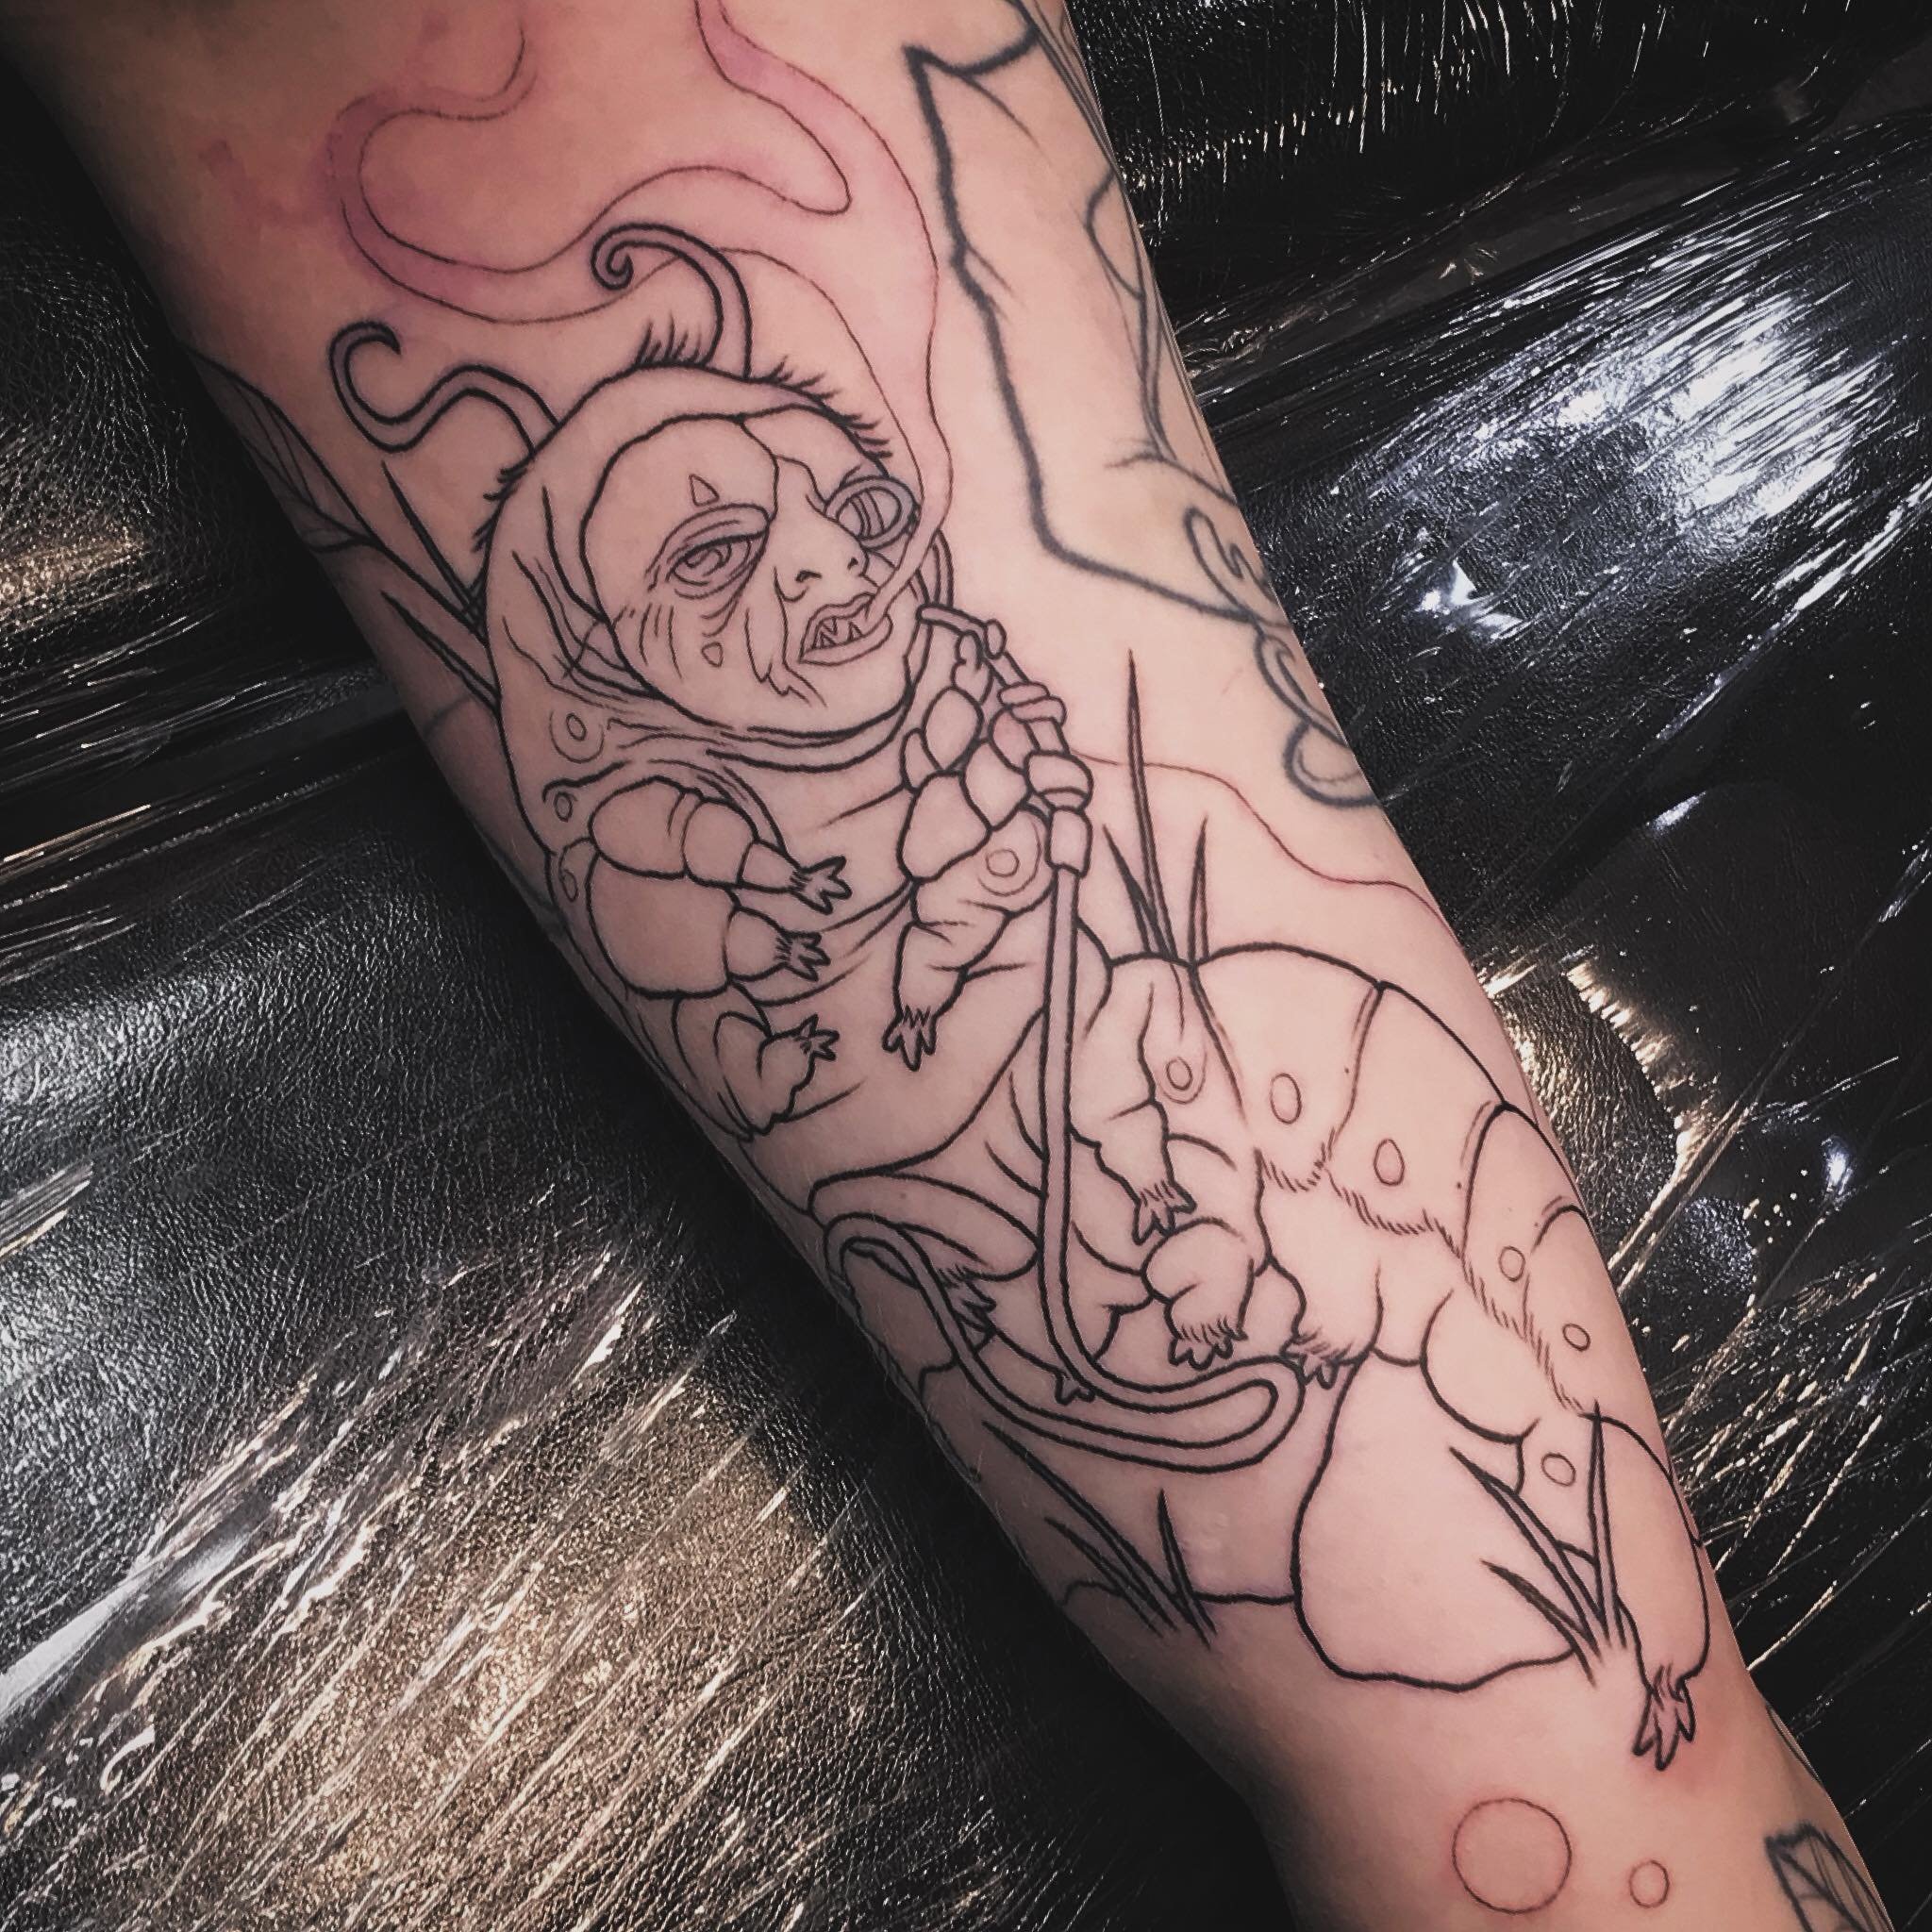 Outlined this Absolem as part of an Alice in Wonderland sleeve today 🐰 
Thankyou so much @tahliametcalf 🖤

#absolem #aliceinwonderland #tattoosleeve #tattooedgirls #sleevetattoo #workinprogress #dynamicink #melbournetattoo